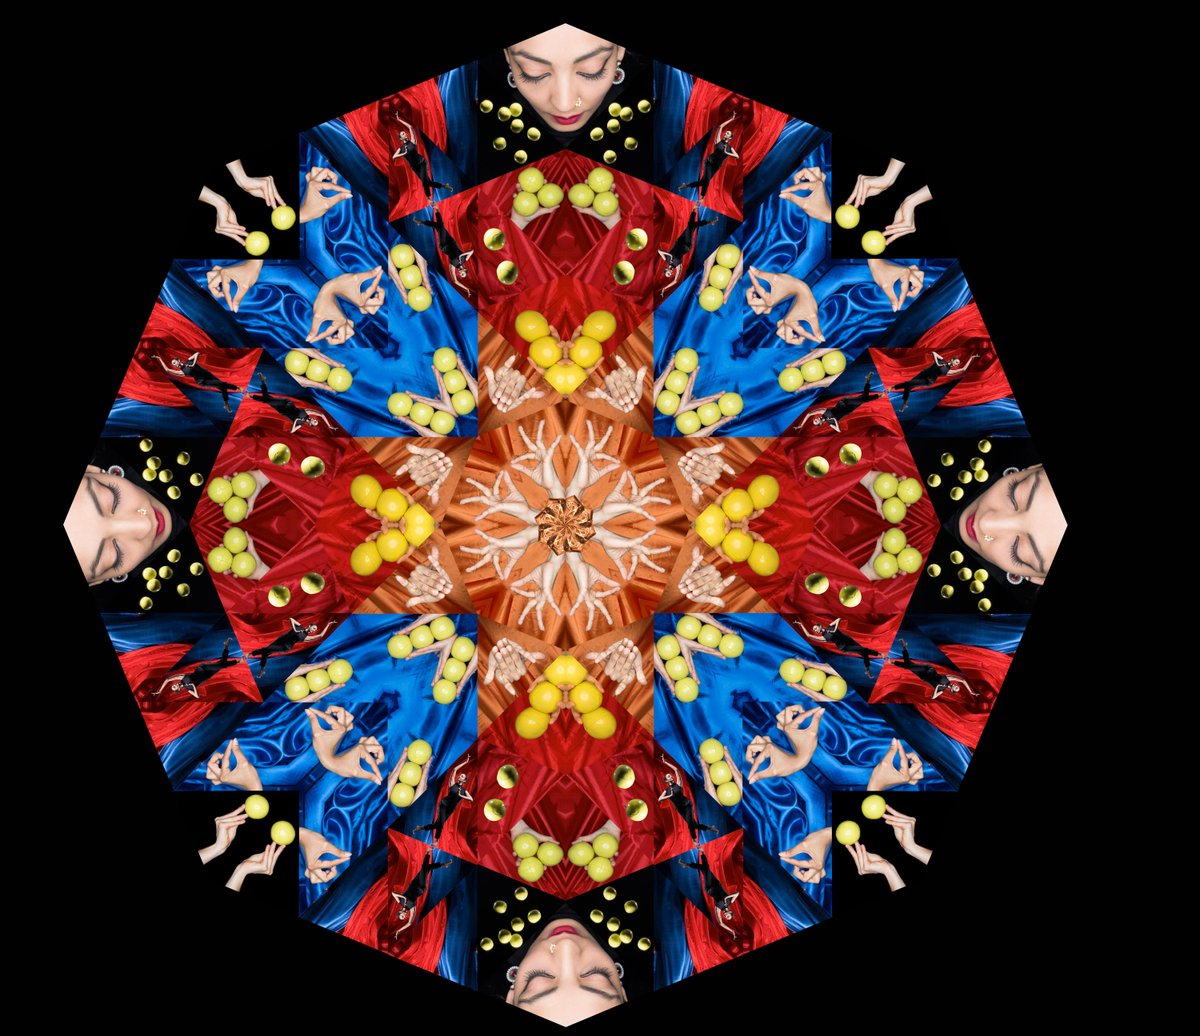 TICKETS ON SALE NOW for SIGMA @gandinijuggling’s beautiful new show explores the creative interface between juggling, geometry and classical Indian dance. Thur 1 Nov 2018 at 7:30pm barnsleycivic.co.uk/events/sigma